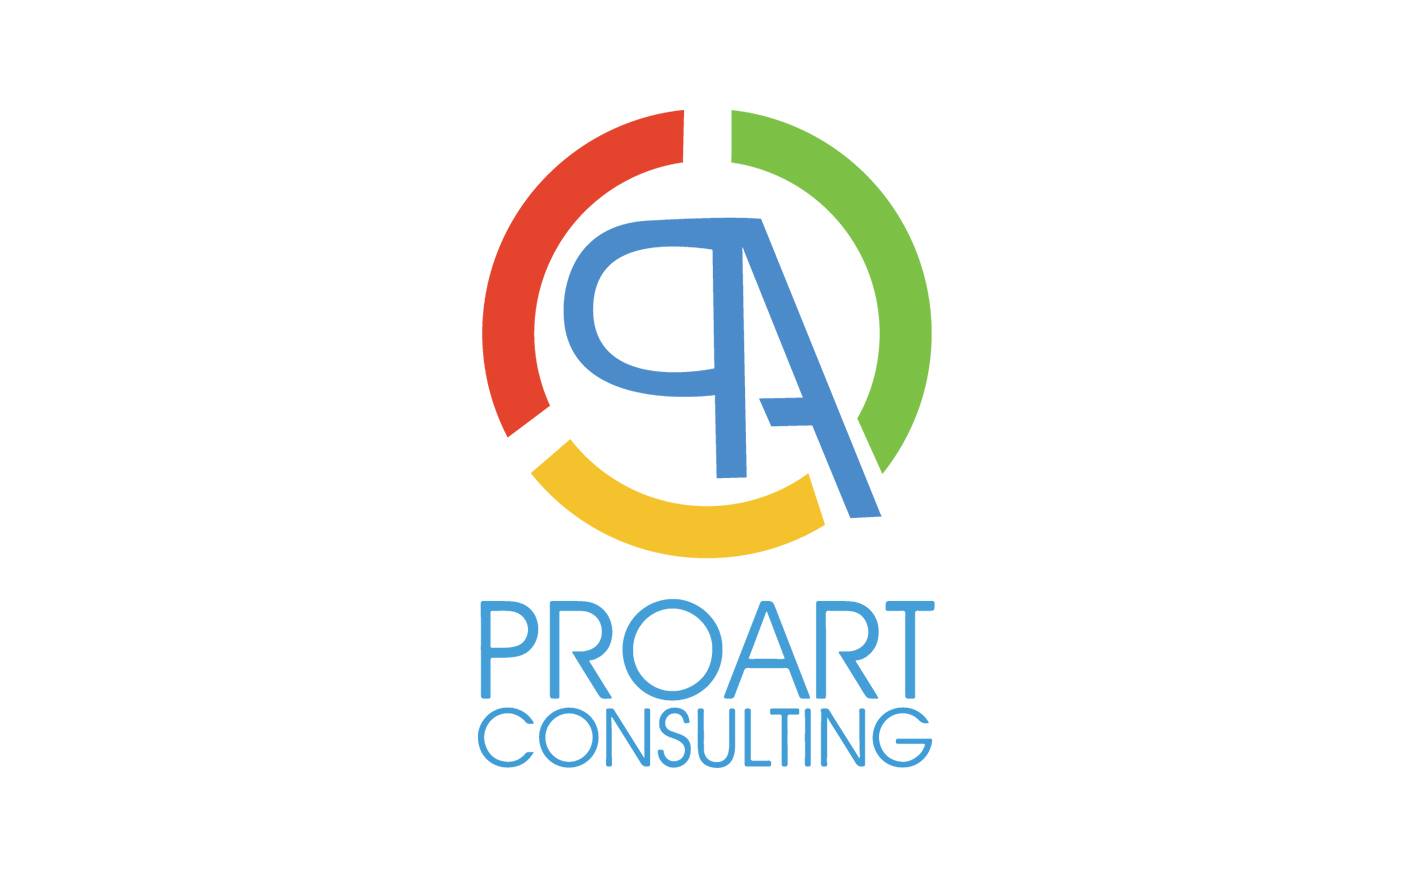 PROART Consulting